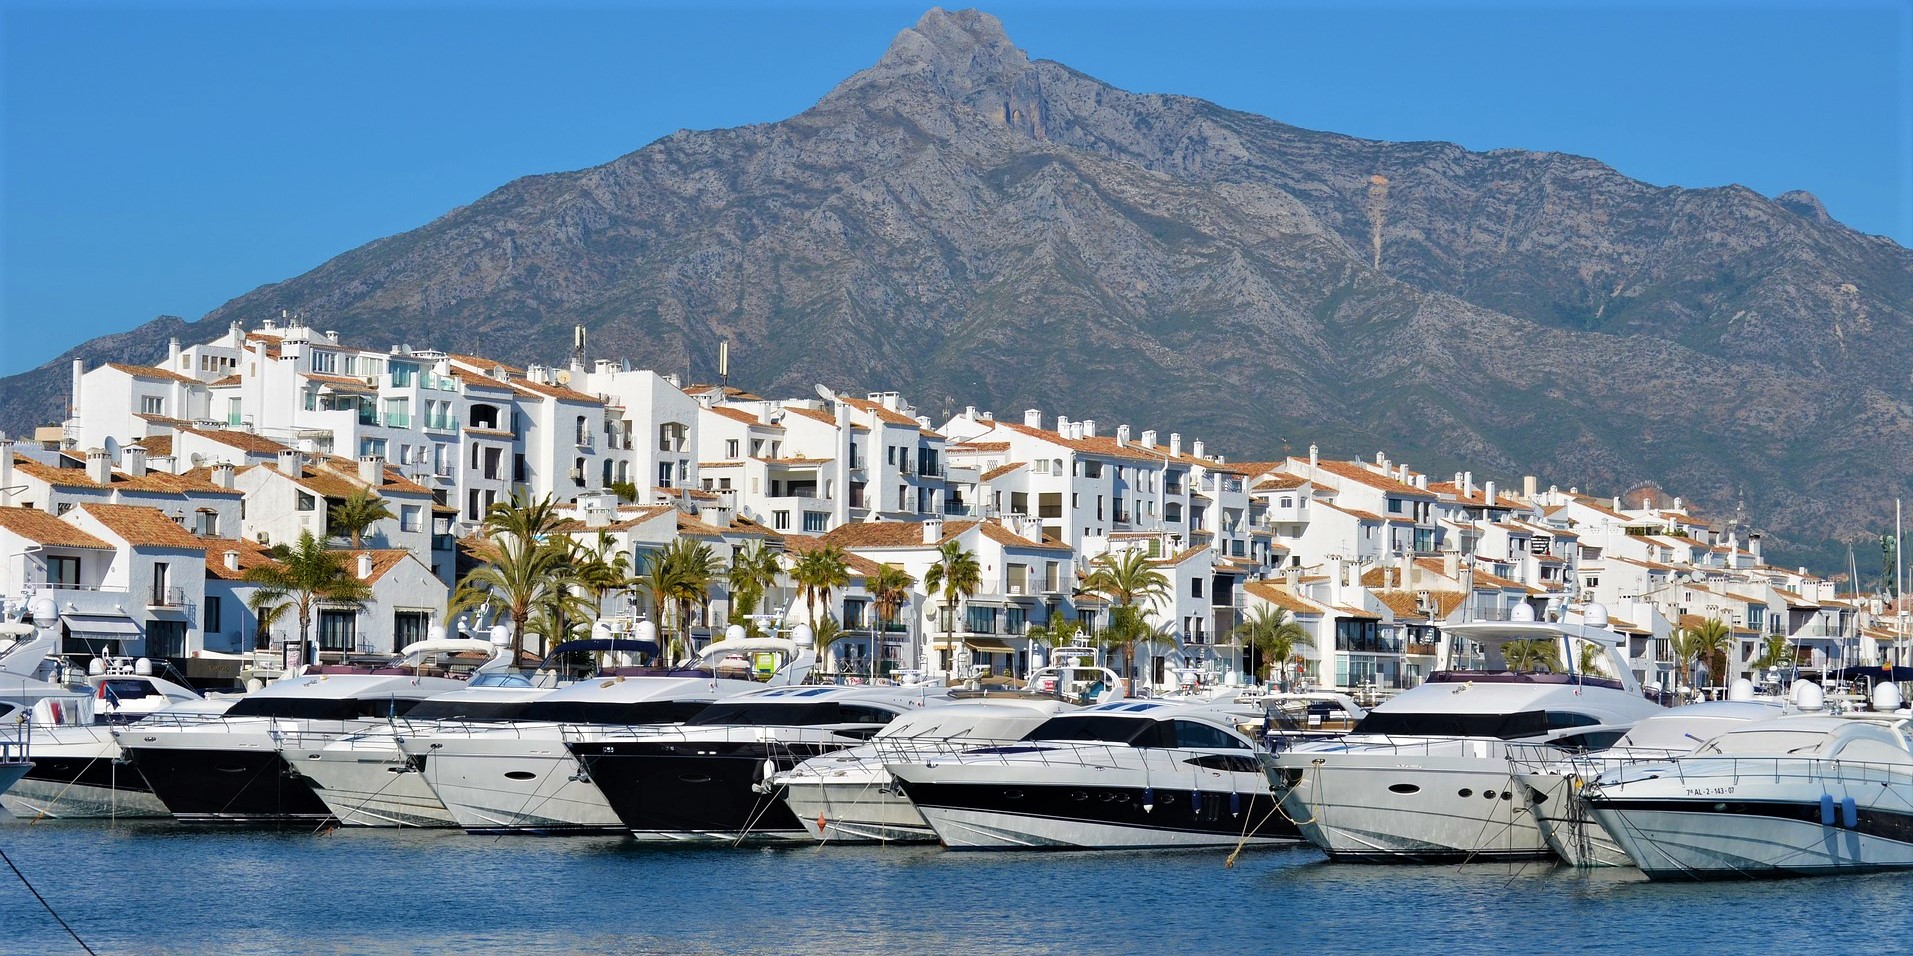 British Man Breaks Ankle Trying To Escape Arrest For Gang Sex Abuse Of Underage British Girl In Spain's Marbella Area